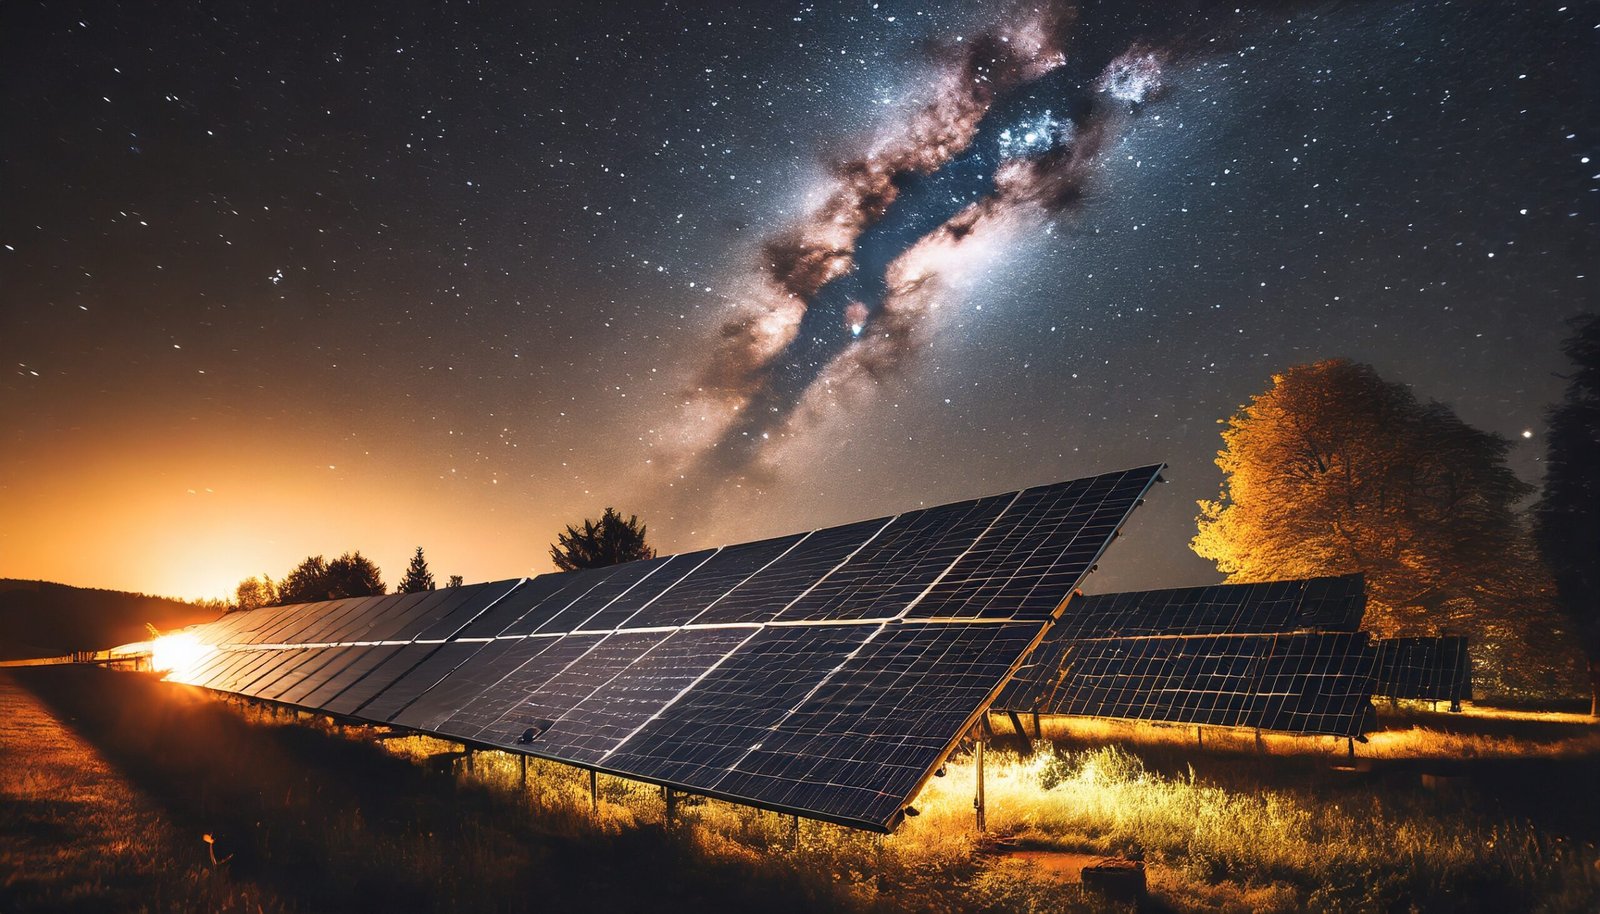 Solar panel array at night with the milky way in the sky